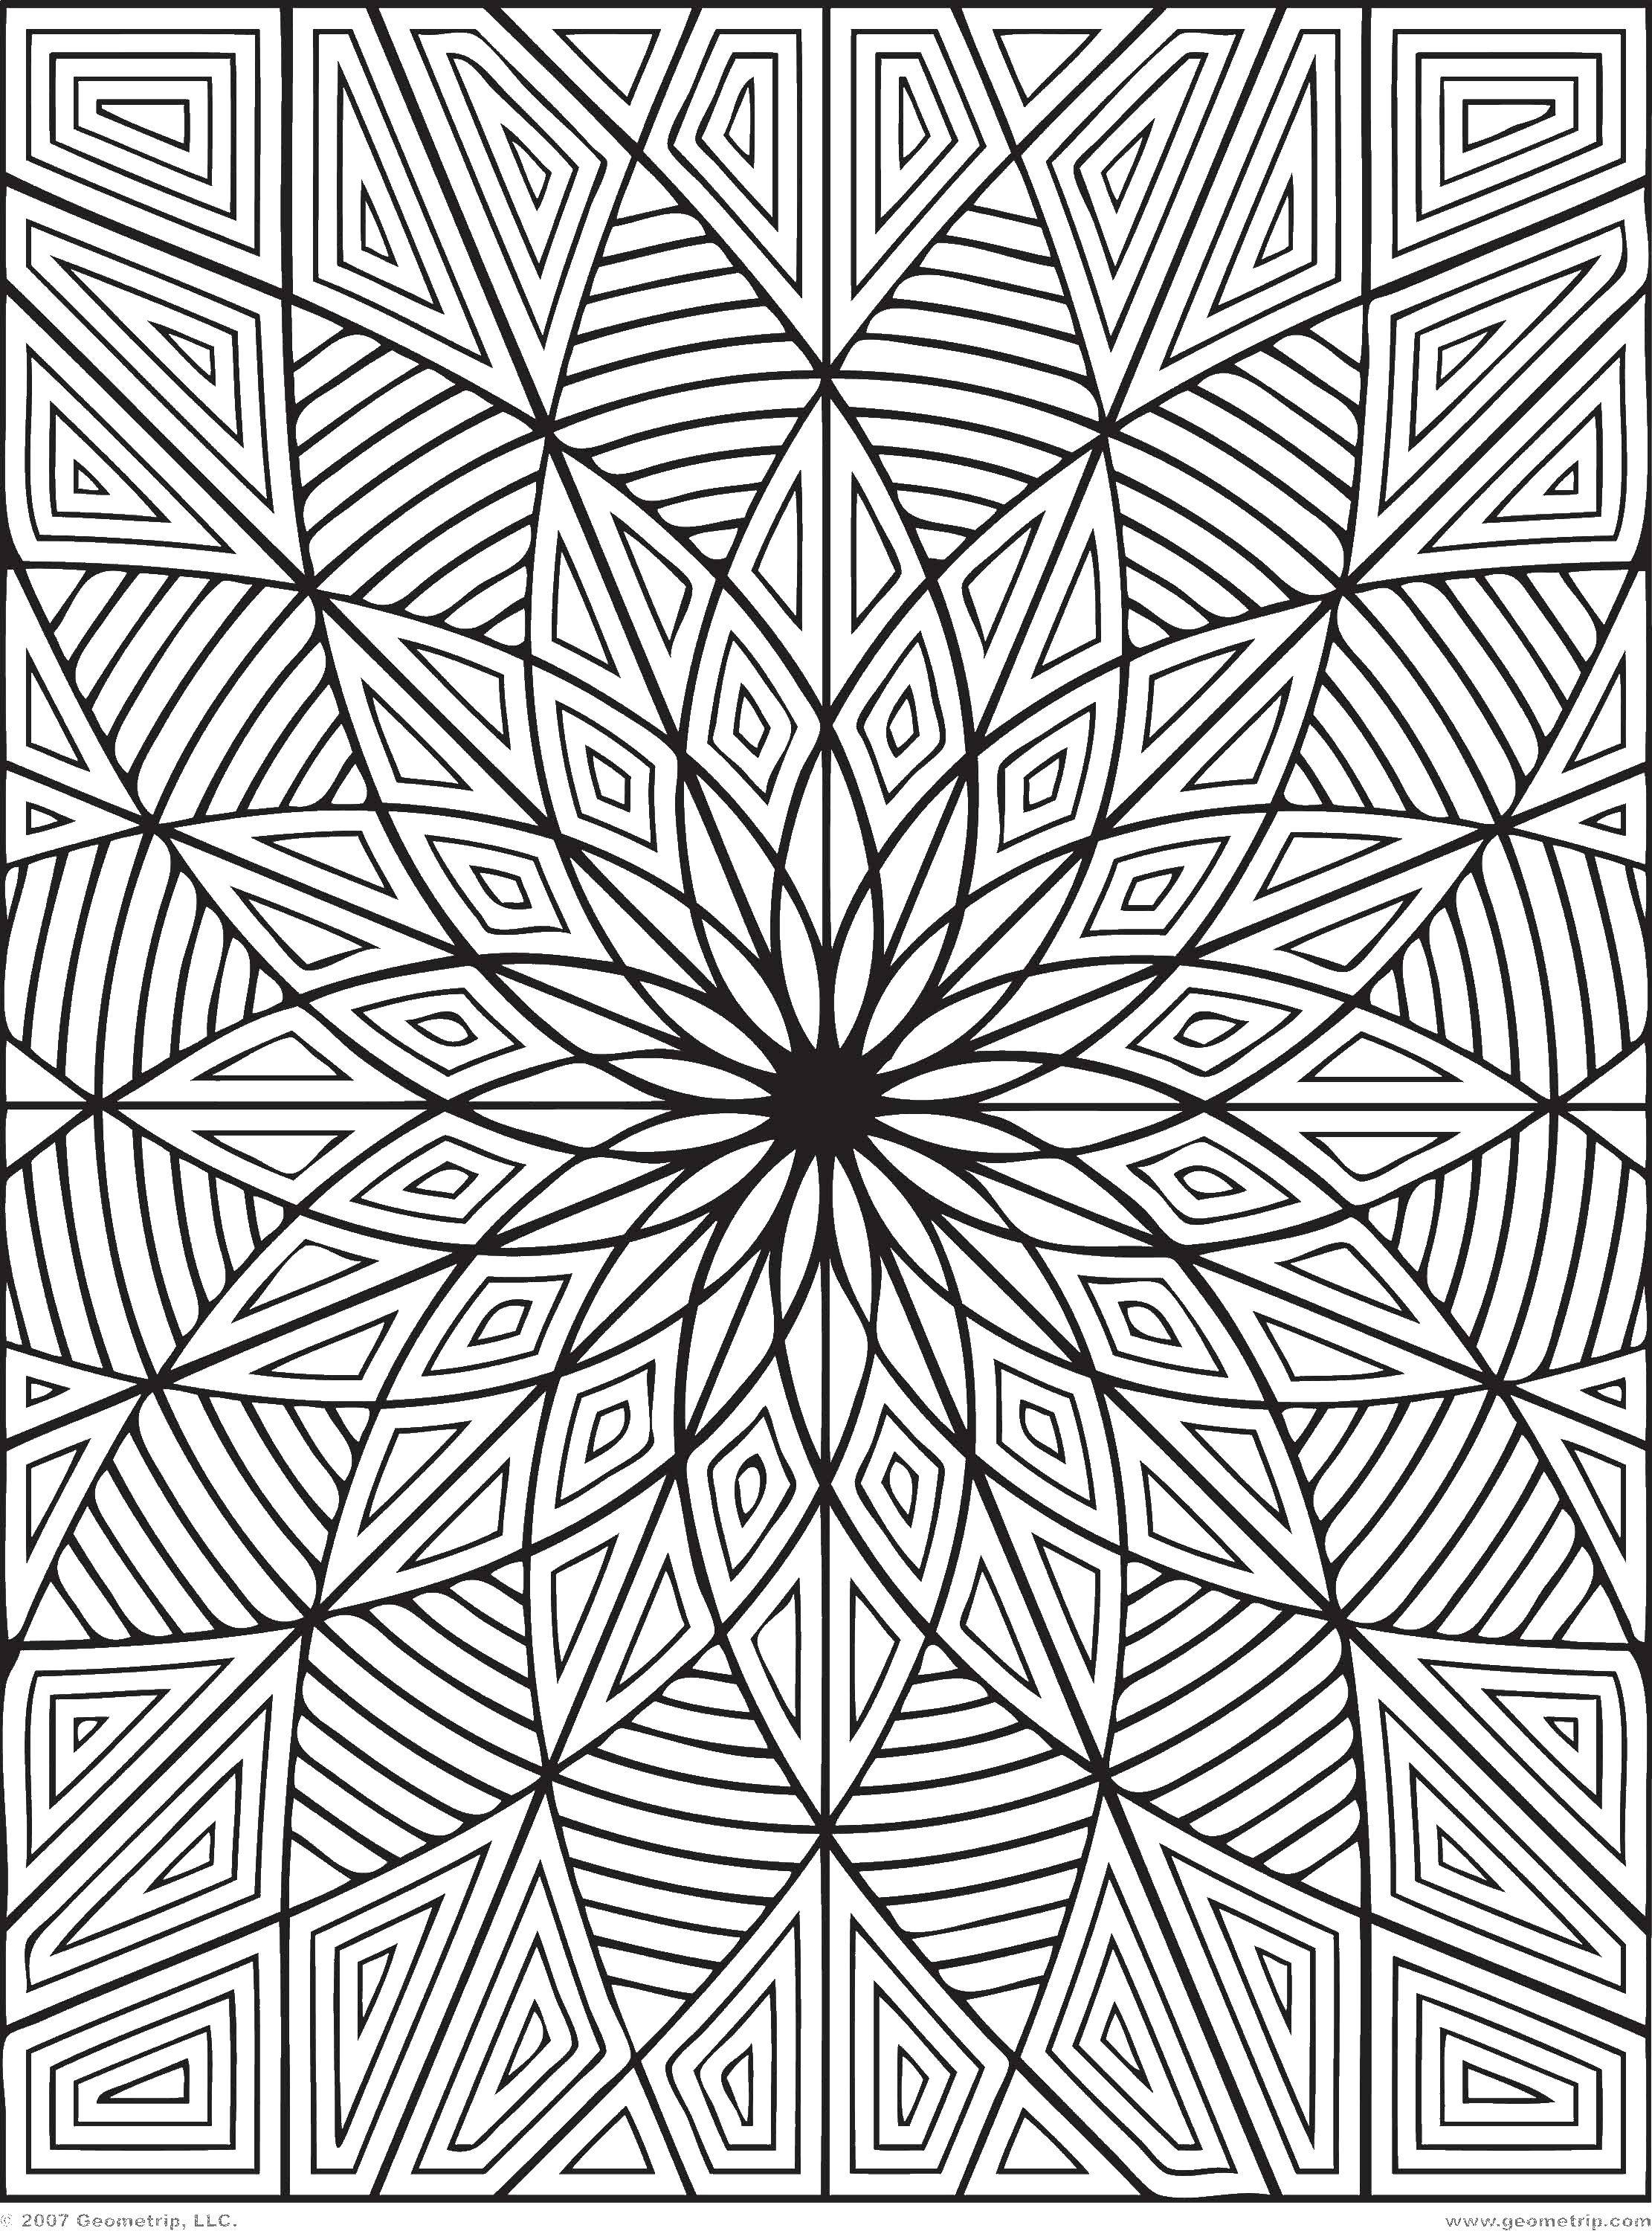 Coloring Pattern geometry. Category With patterns. Tags:  Pattern, geometry.